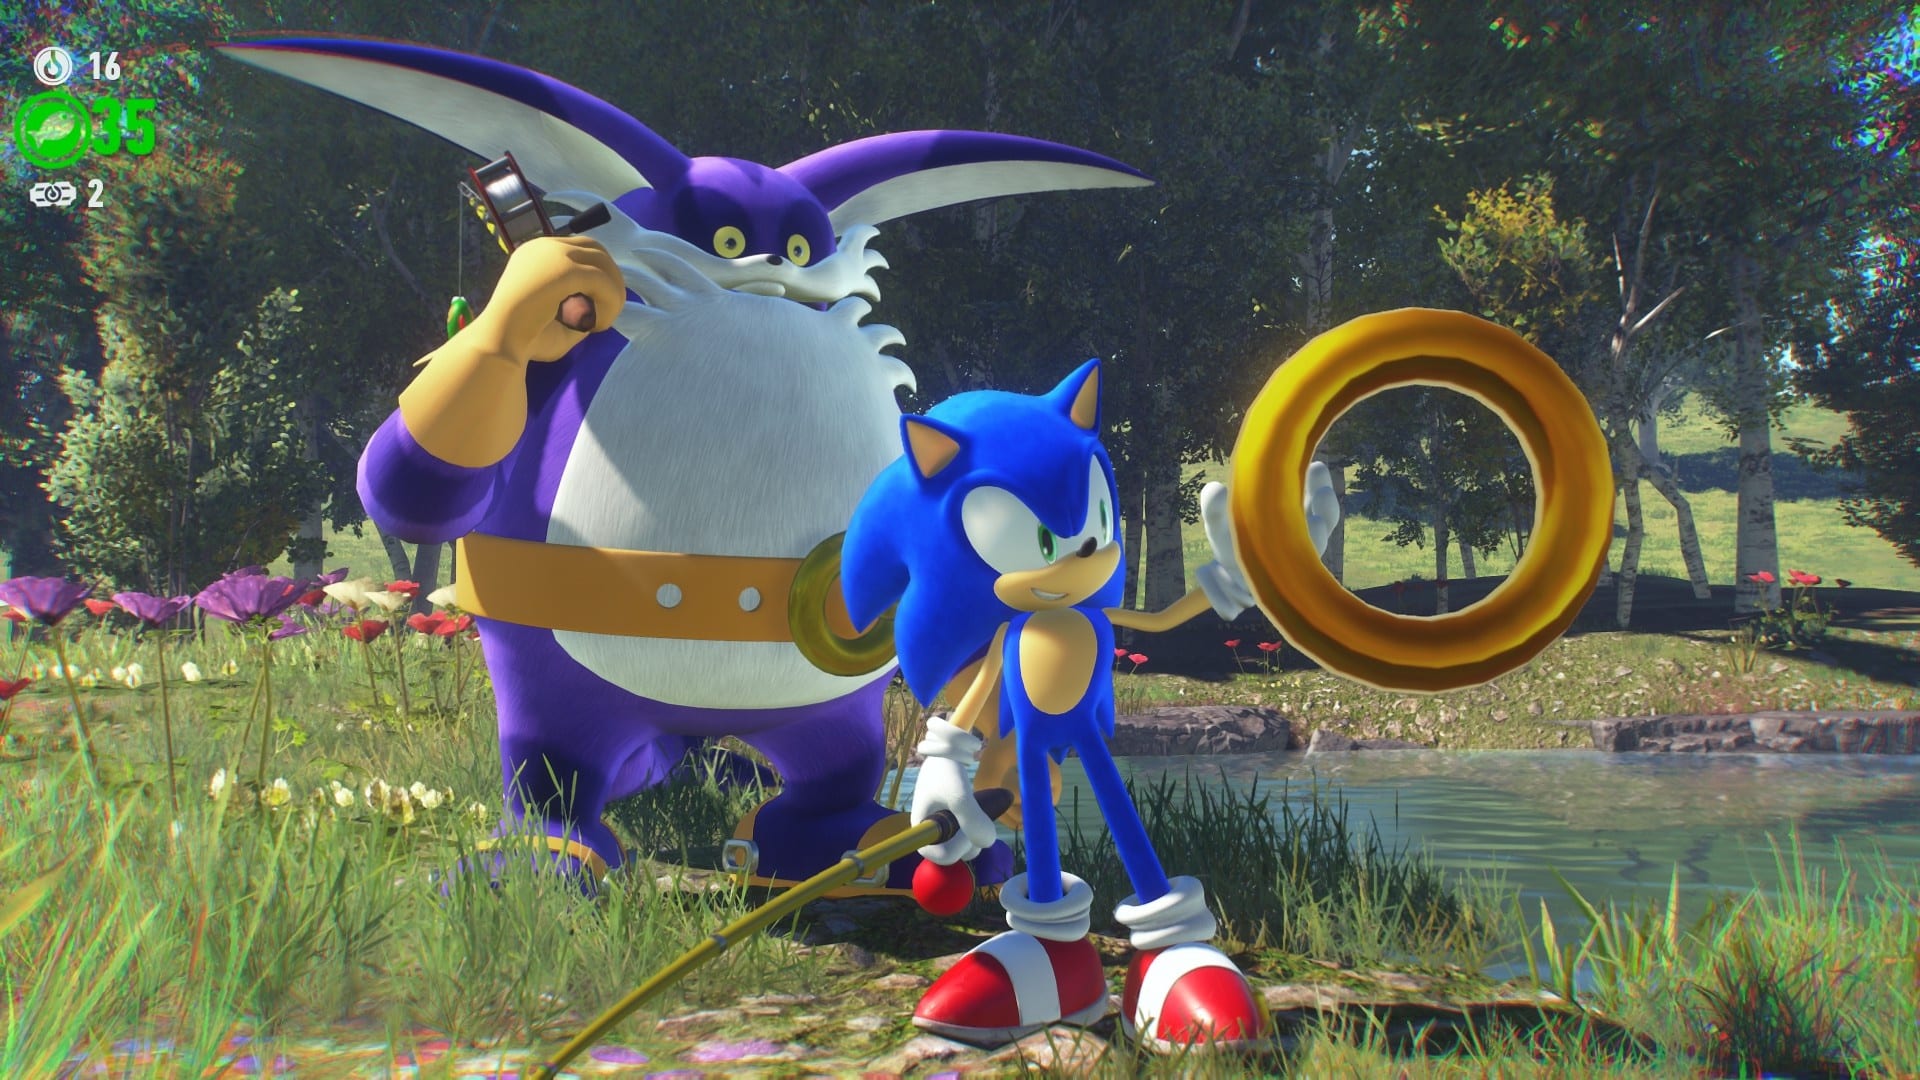 (Big the Cat once again invites you to go fishing and Sonic pulls more than just fish out of the pond.)